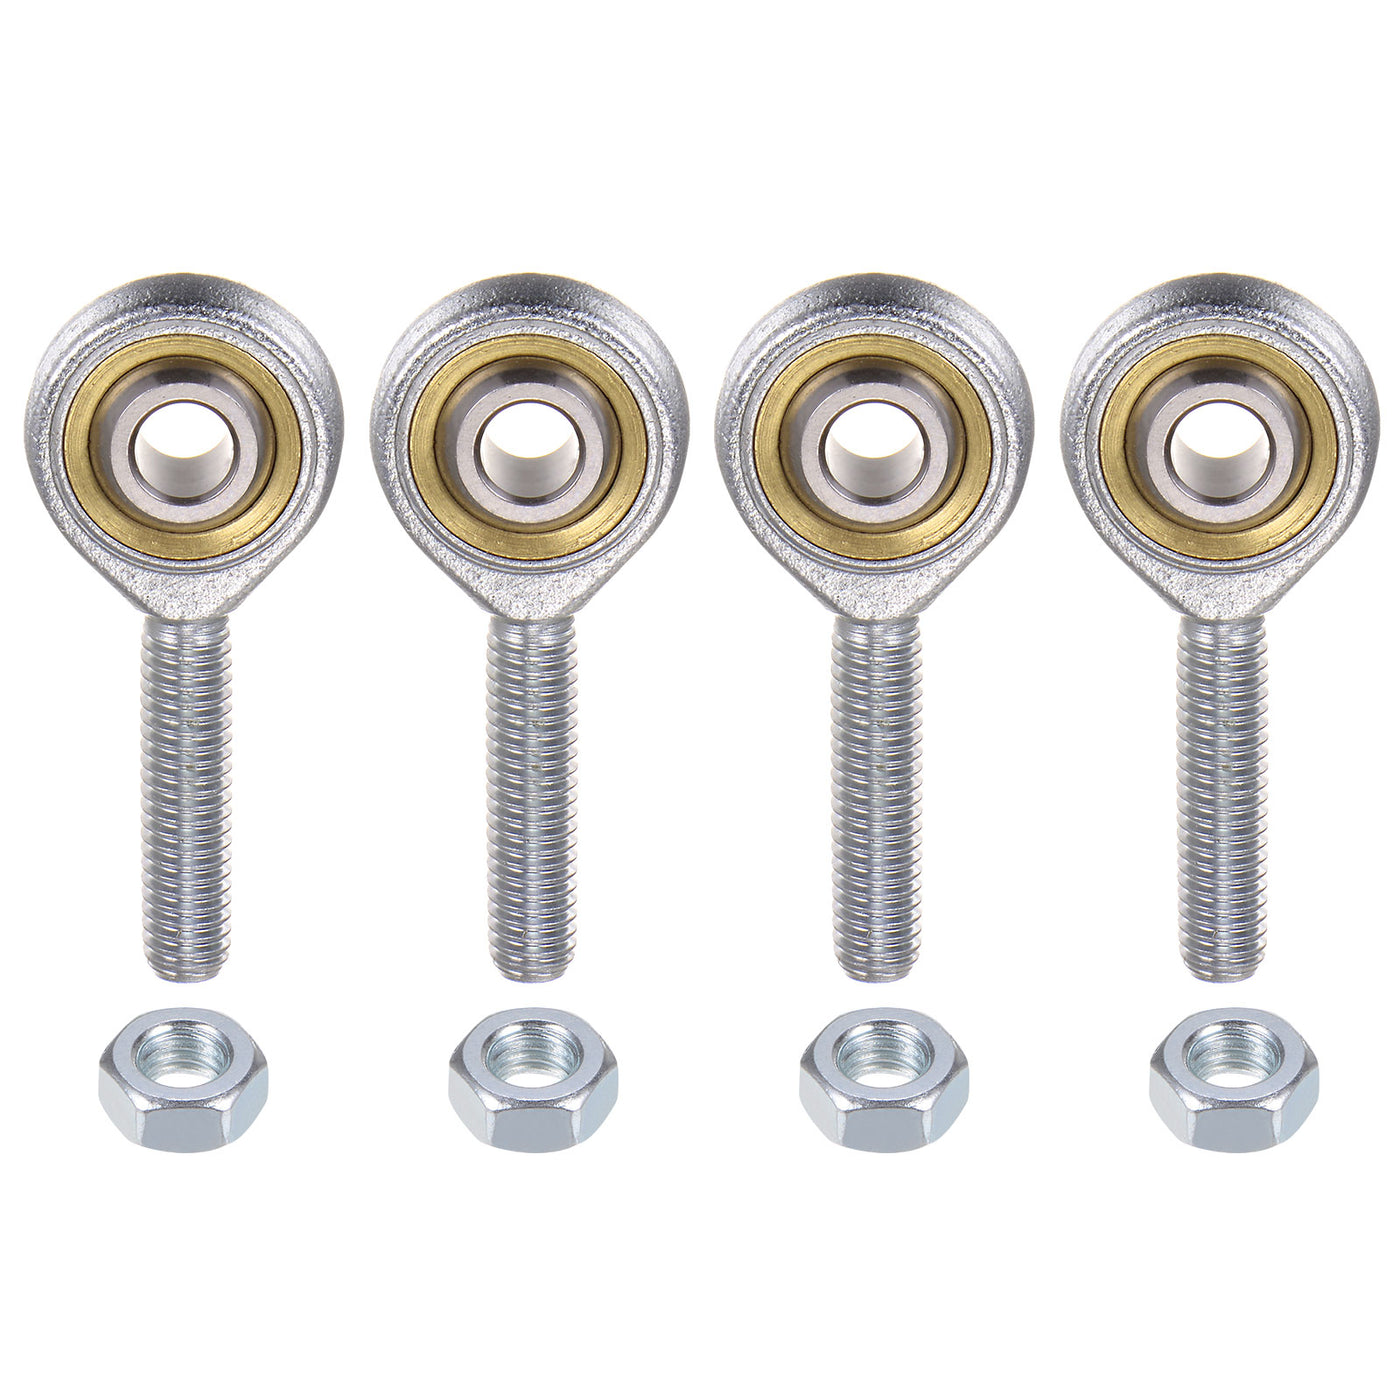 uxcell Uxcell 4pcs SA6TK POSA6 M6 Male Rod End Bearing M6x1 Right Hand Thread,Includes Jam Nut